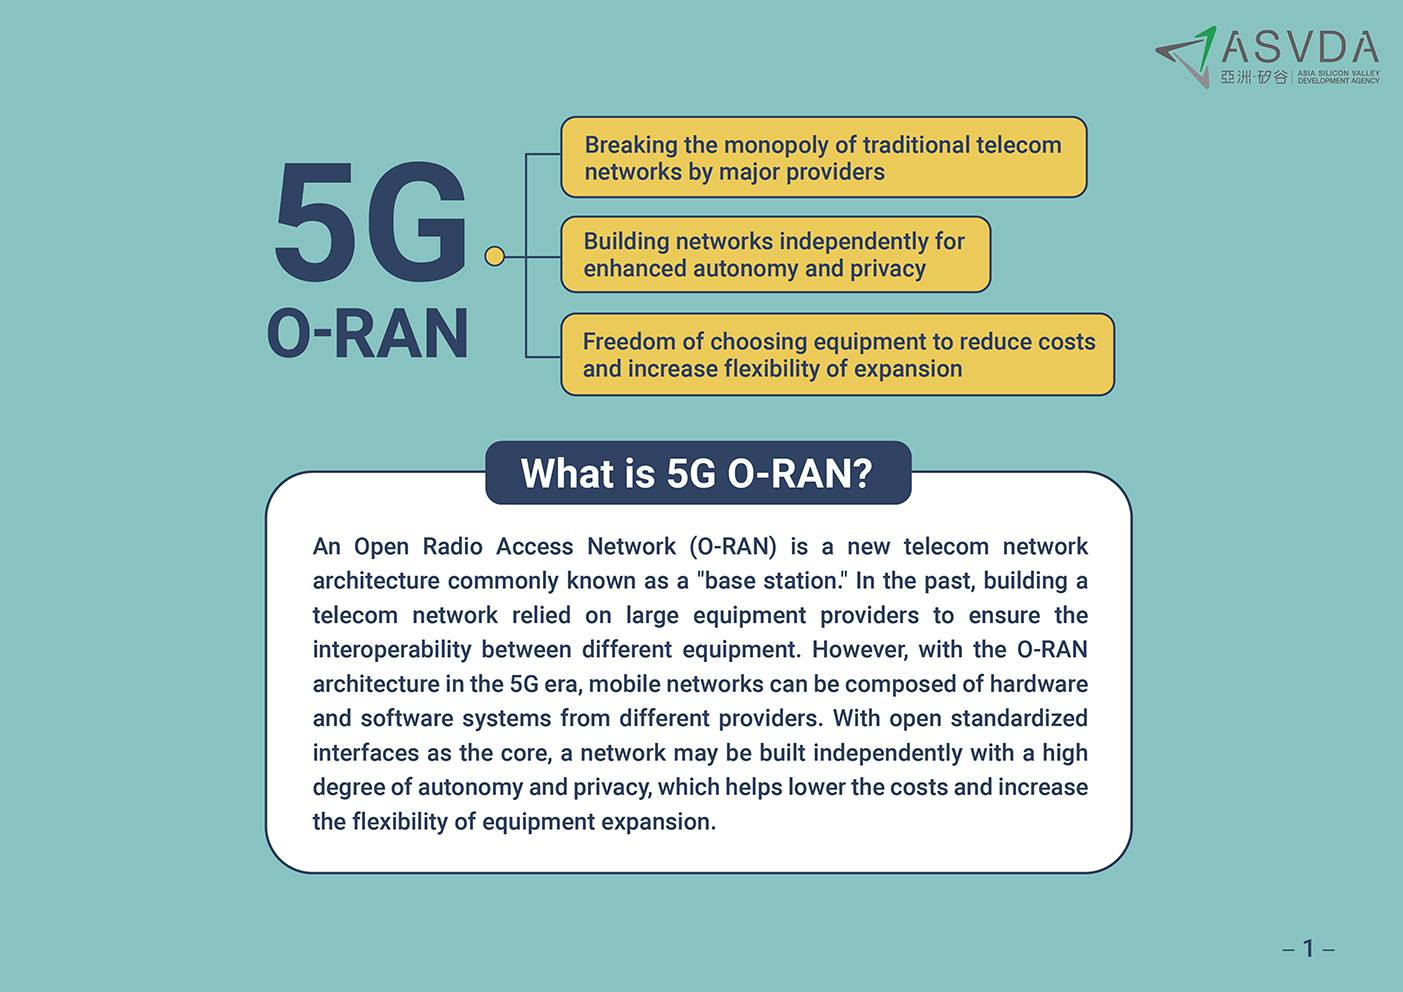 What is 5G O-RAN?